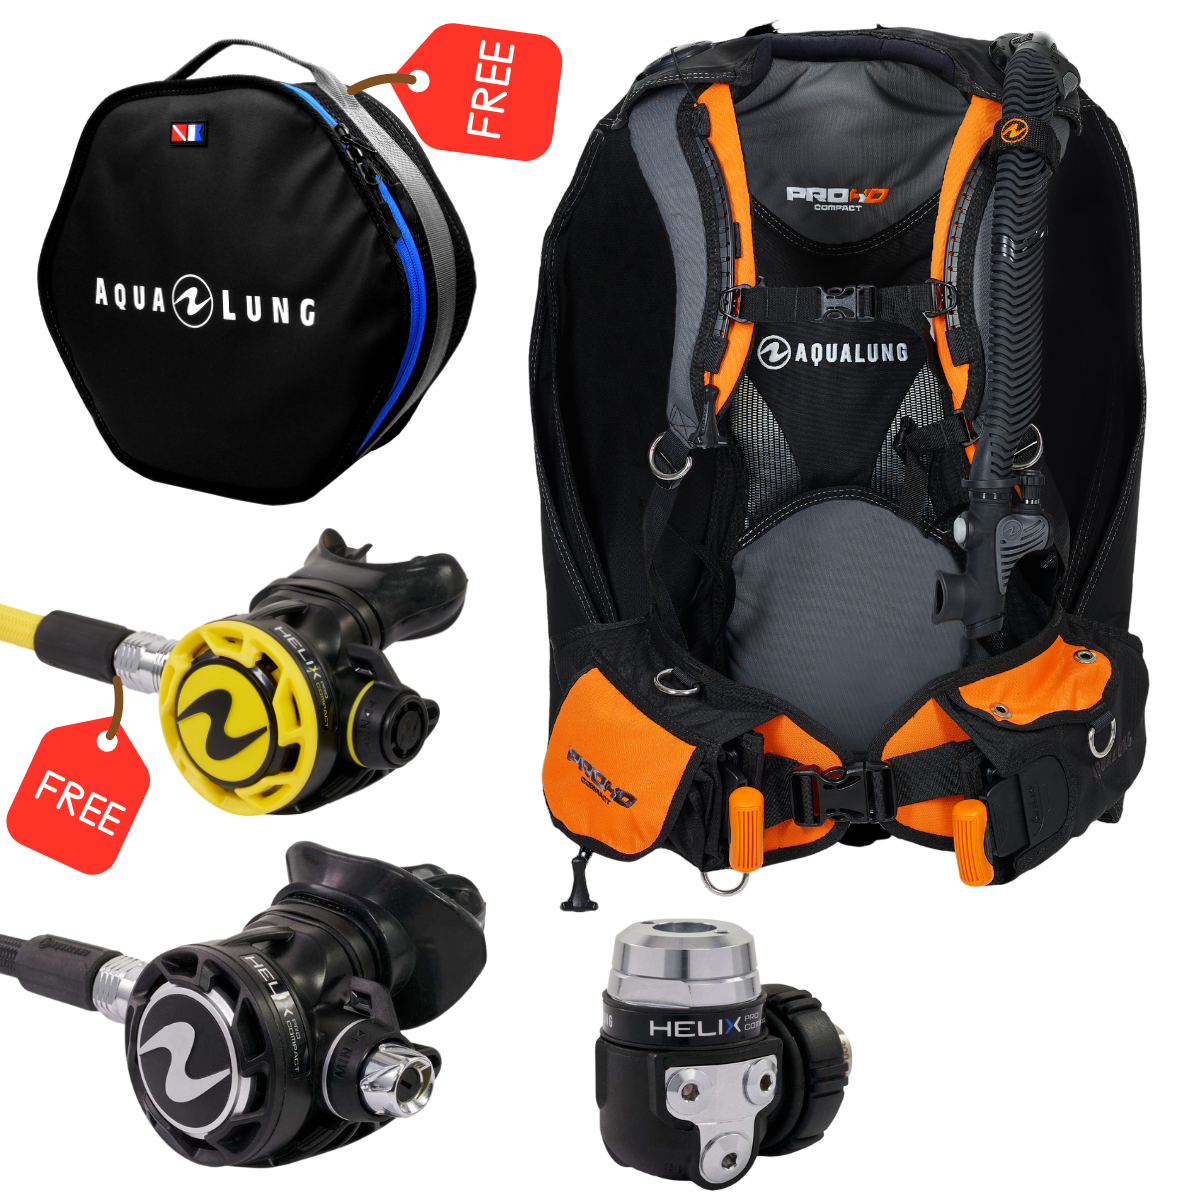 AQUALUNG PRO HD COMPACT BCD HELIX COMPACT PRO DIN REG SET WITH FREE HELIX OCTOPUS AND EXP II REG BAG